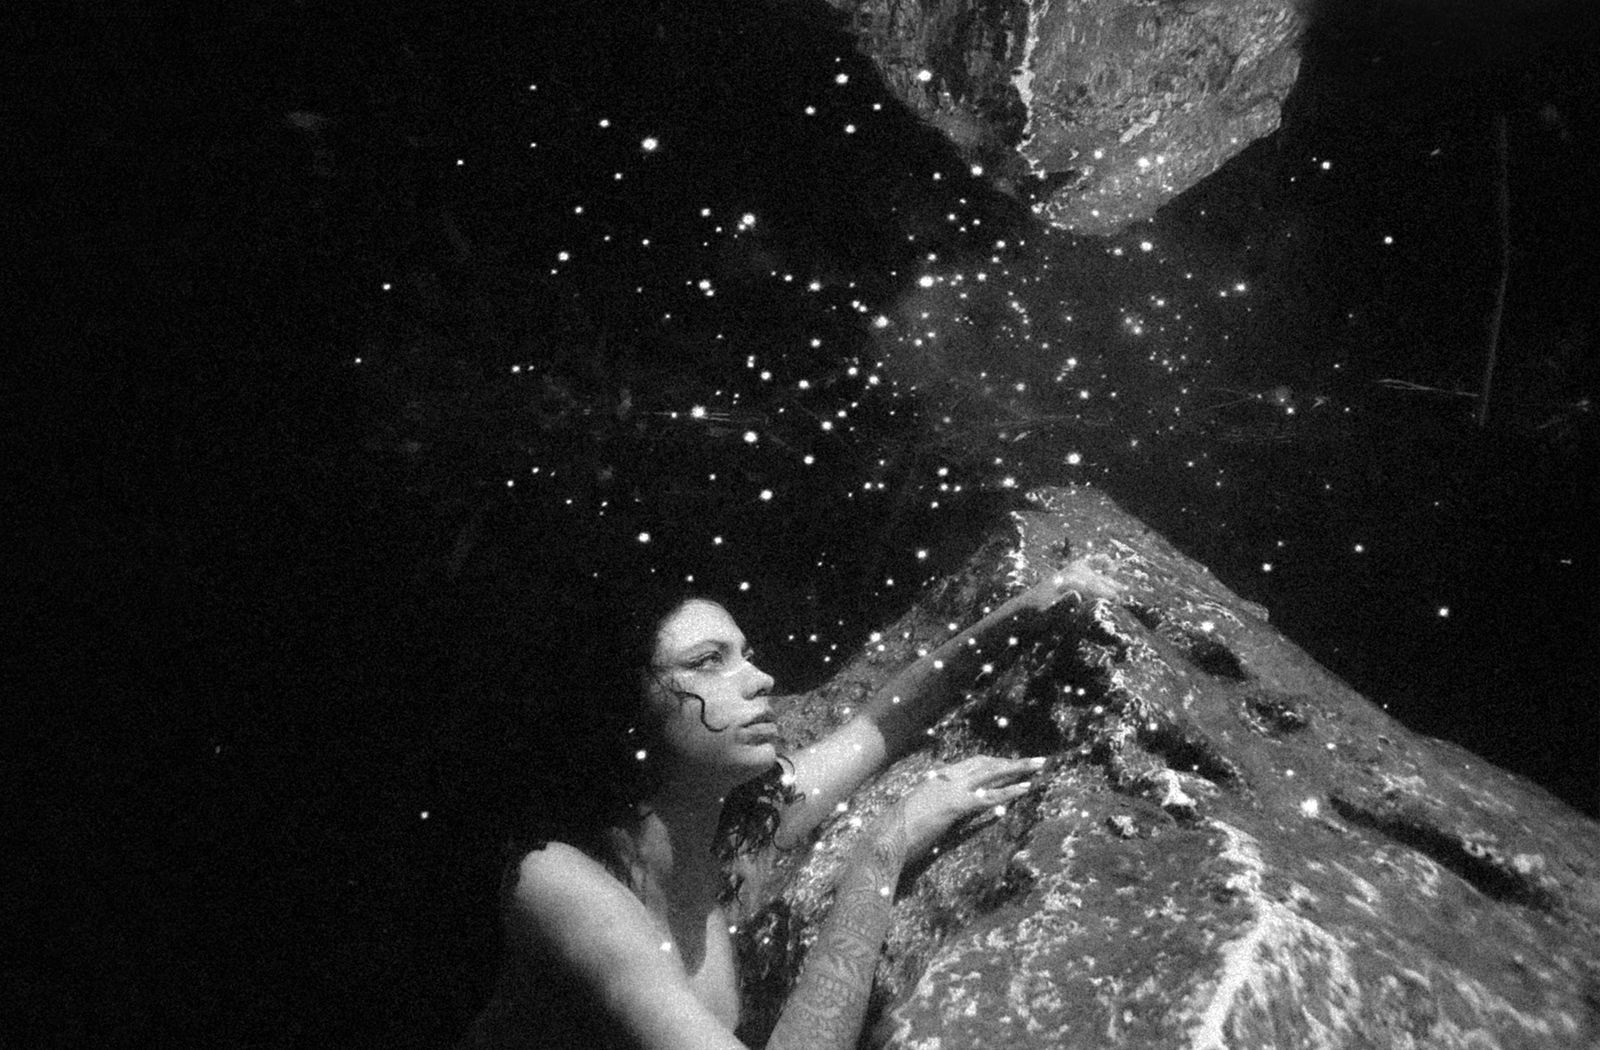 © Takako Noel - Image from the Cenote angels photography project